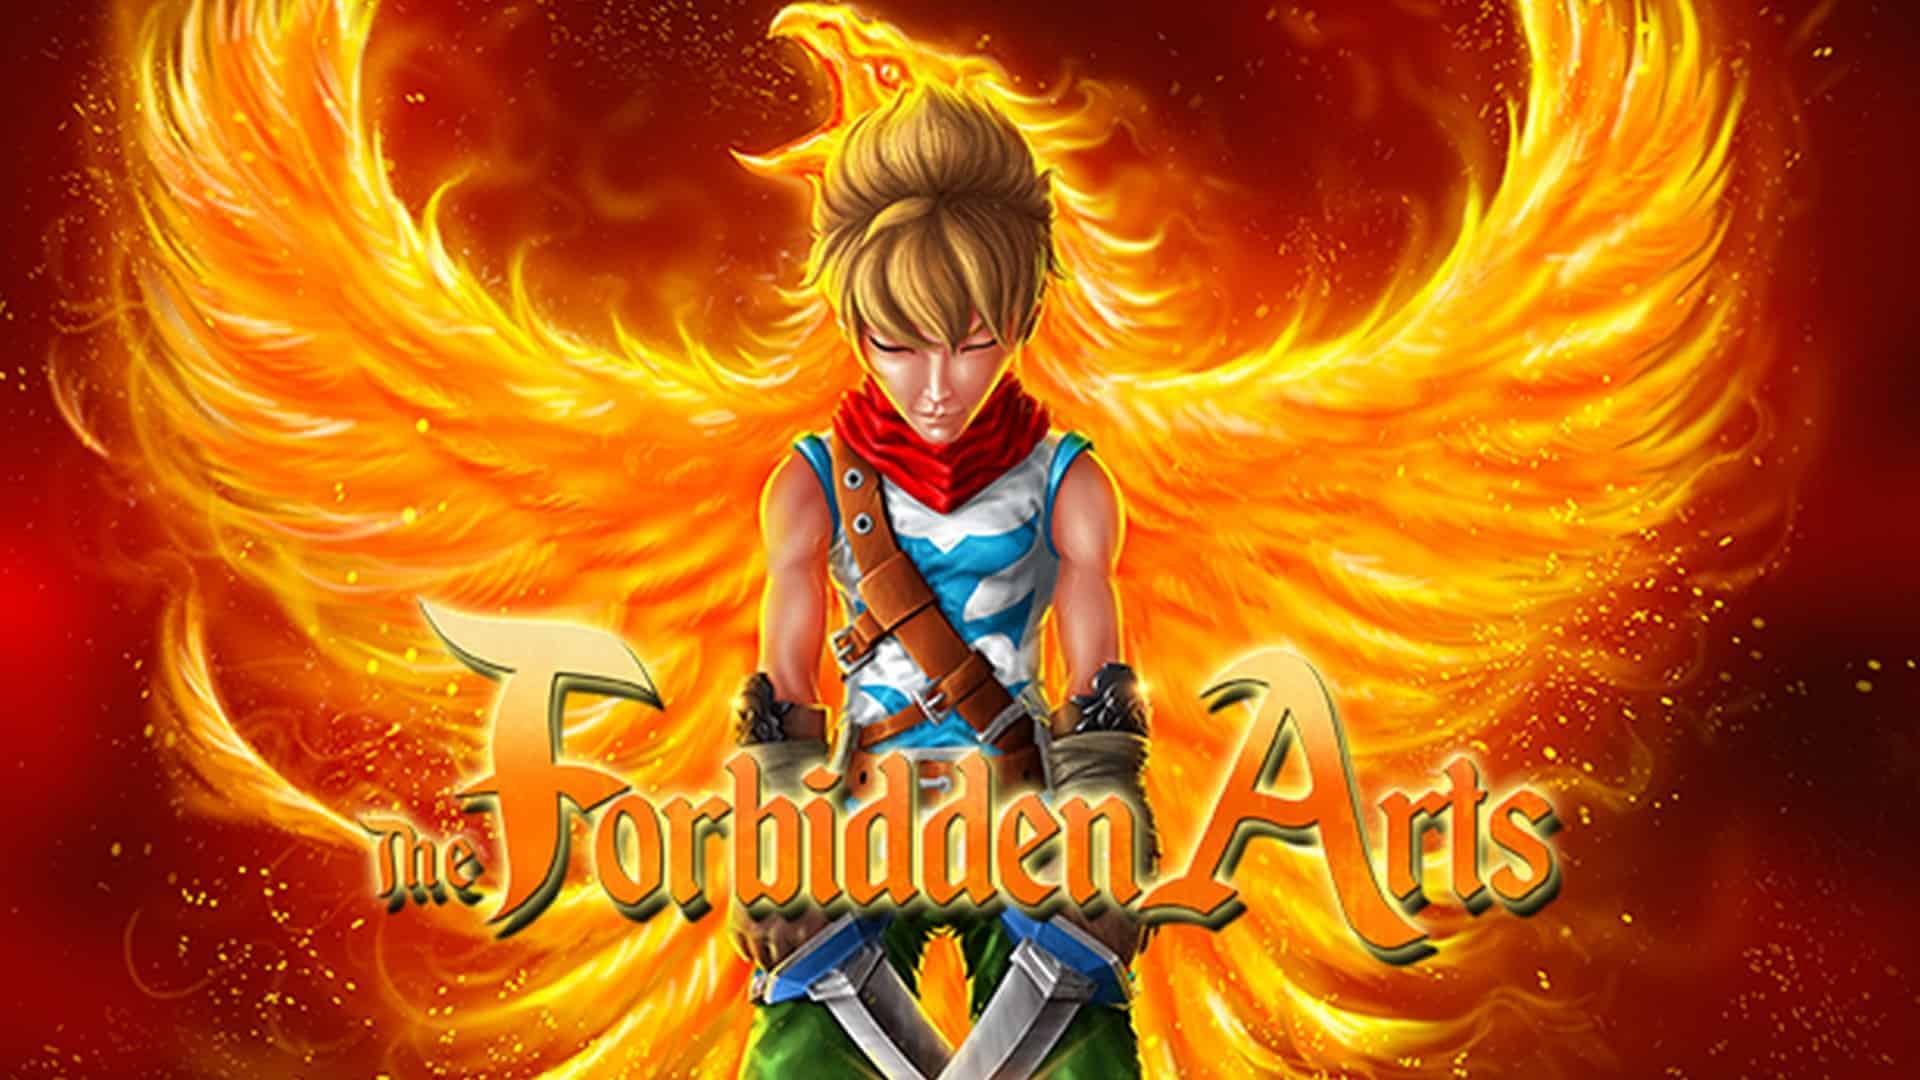 The Forbidden Arts Sets Fire to Nintendo Switch, Xbox One & Steam On 7 Aug